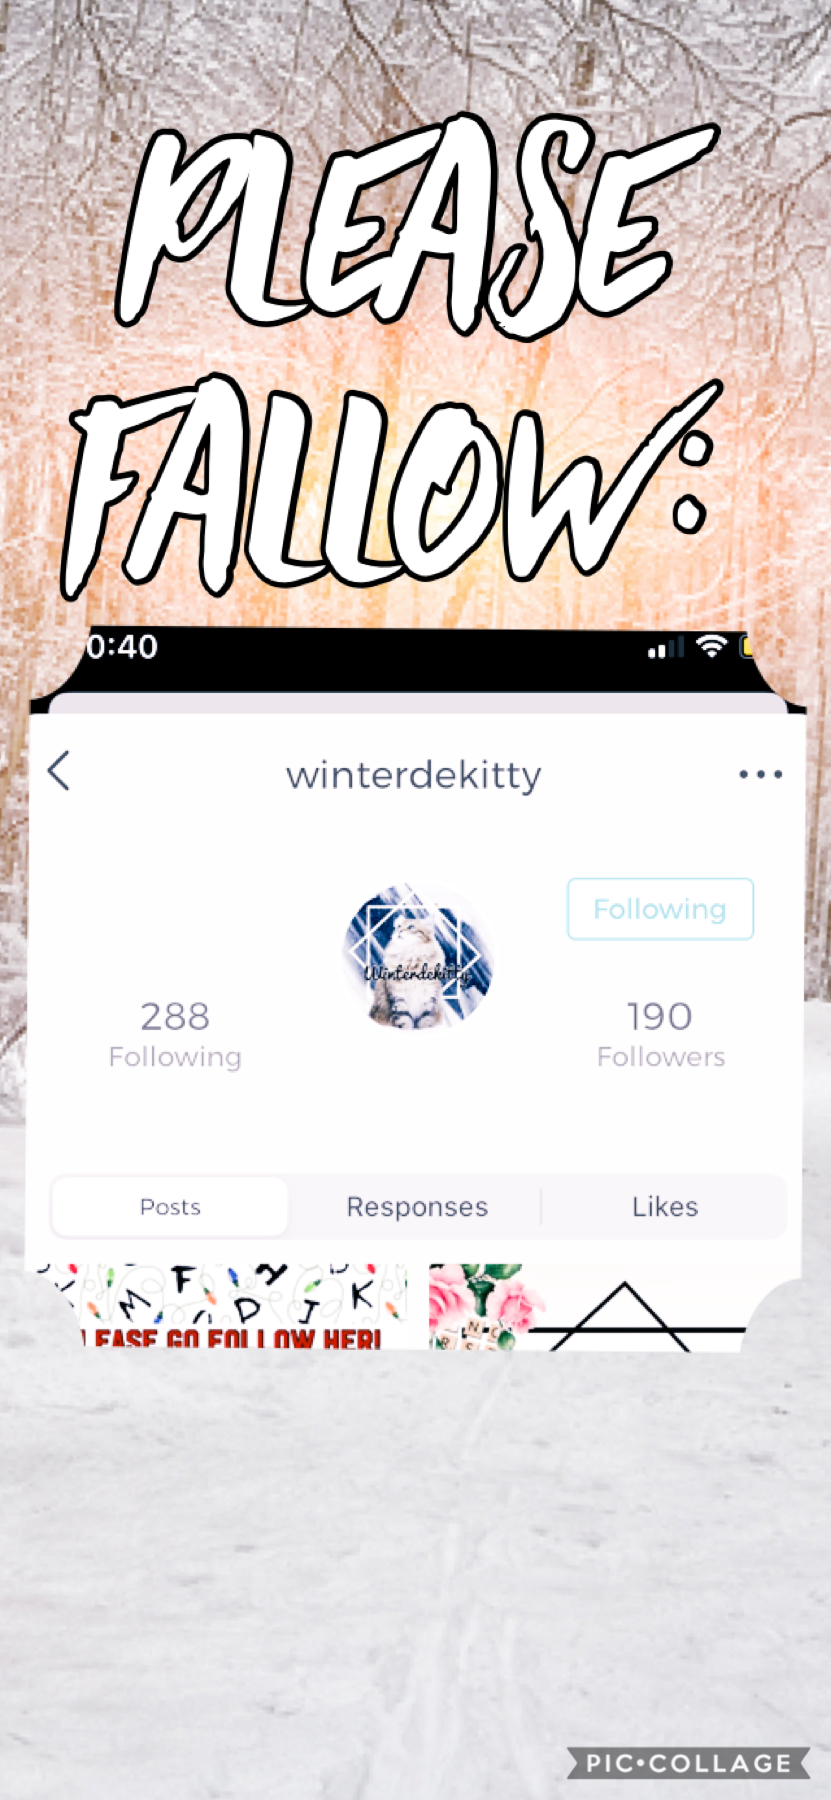 Fallow this person please, and check out her account! Very talented posts on there! ʕ￫ᴥ￩ʔ